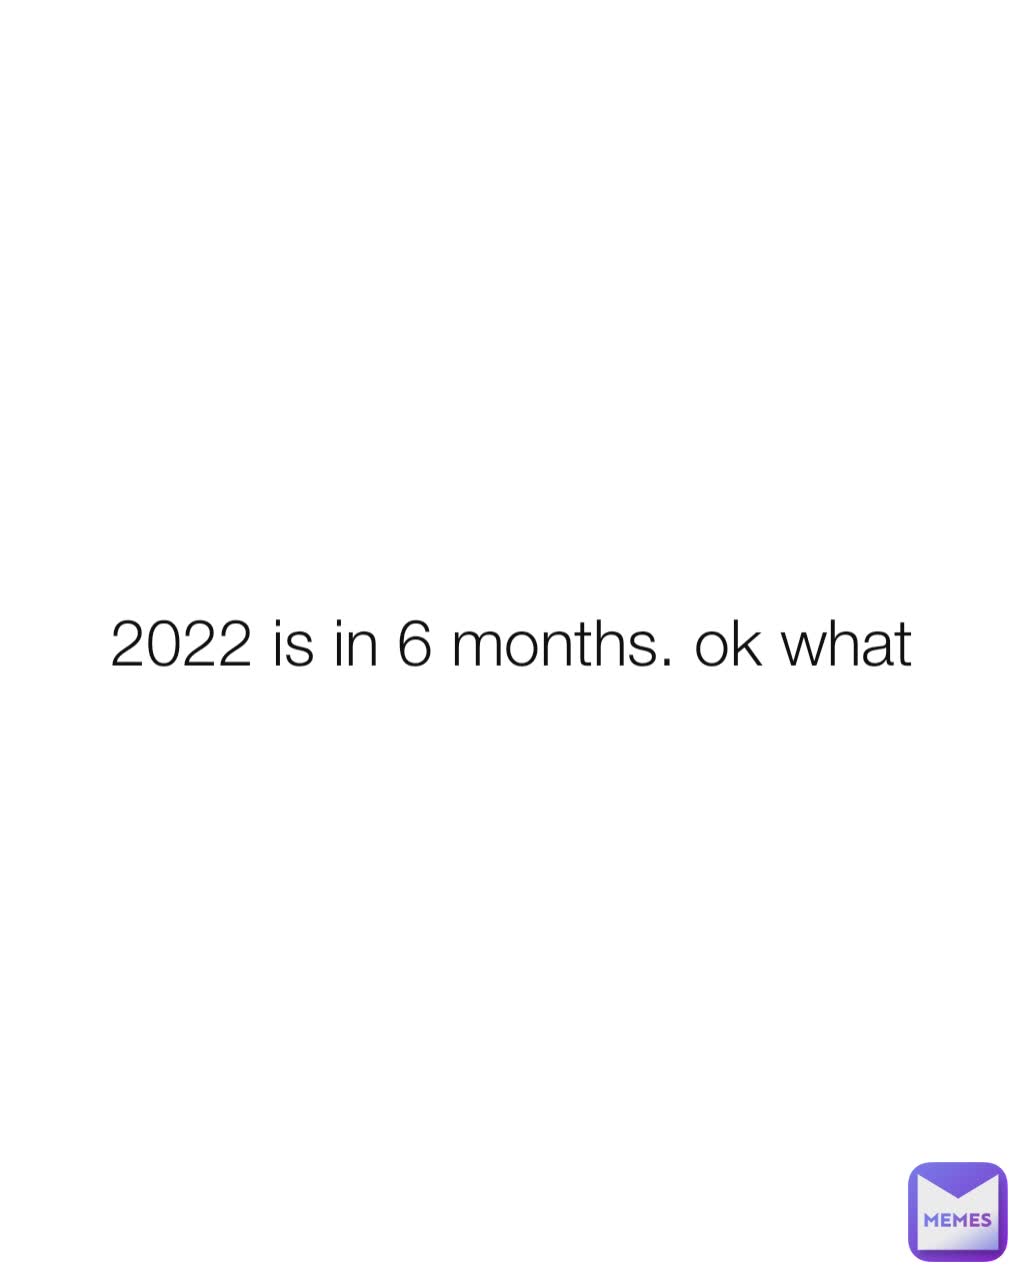 2022 is in 6 months. ok what